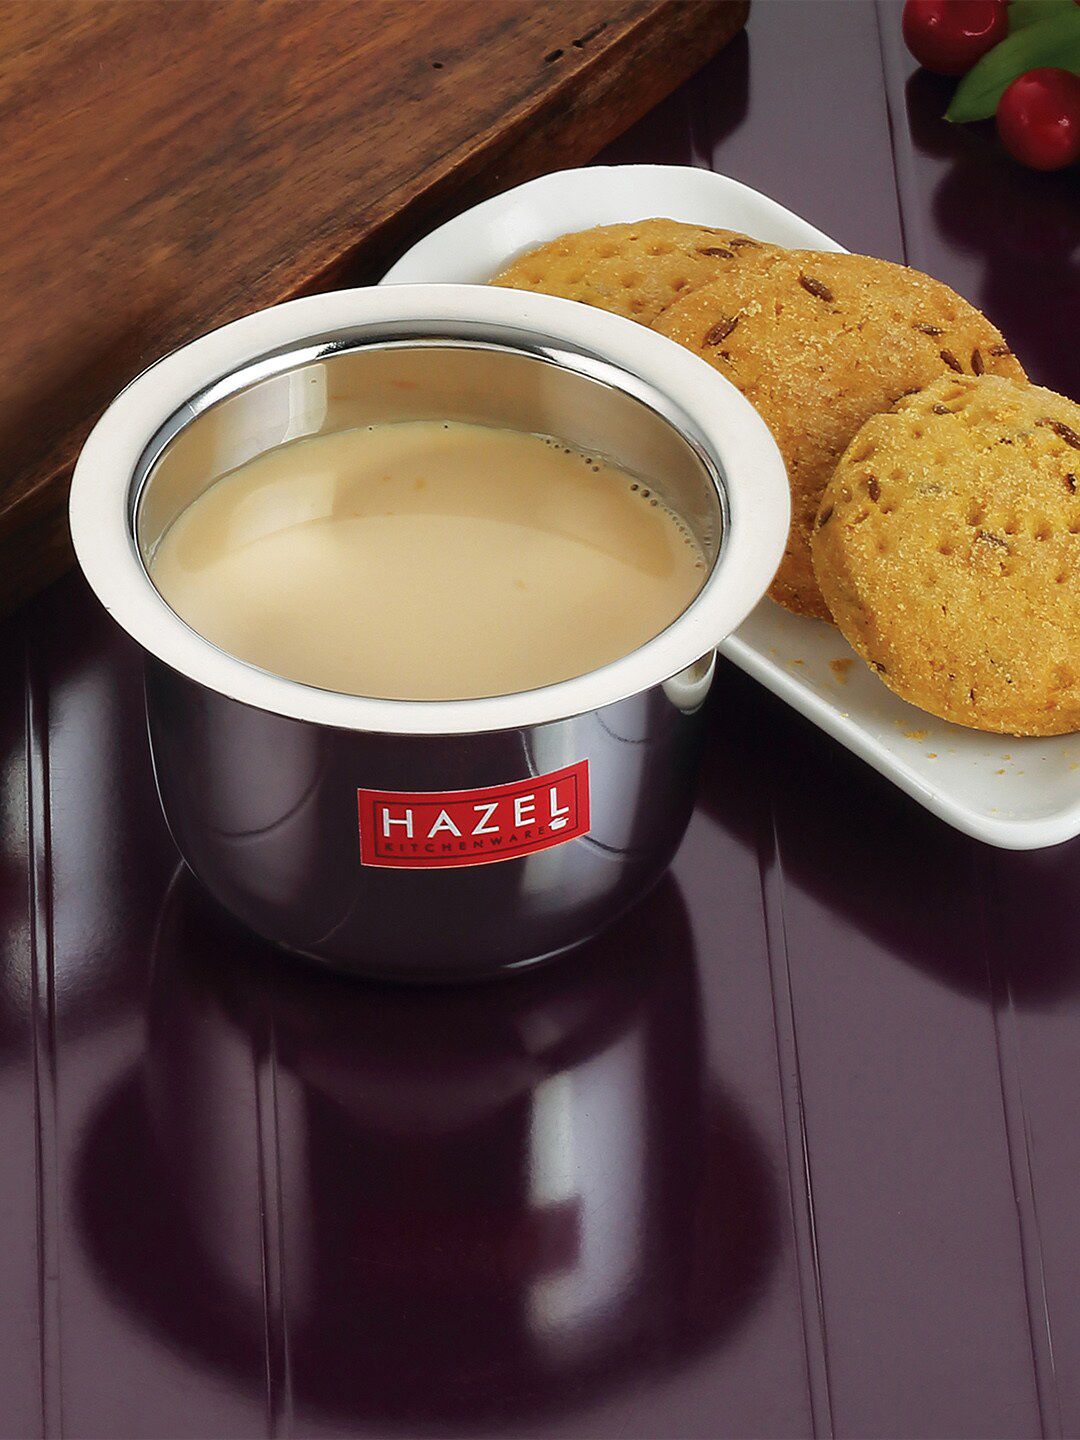 HAZEL Silver-Toned Solid Set of 2 Stainless Steel Cups and Mugs Price in India